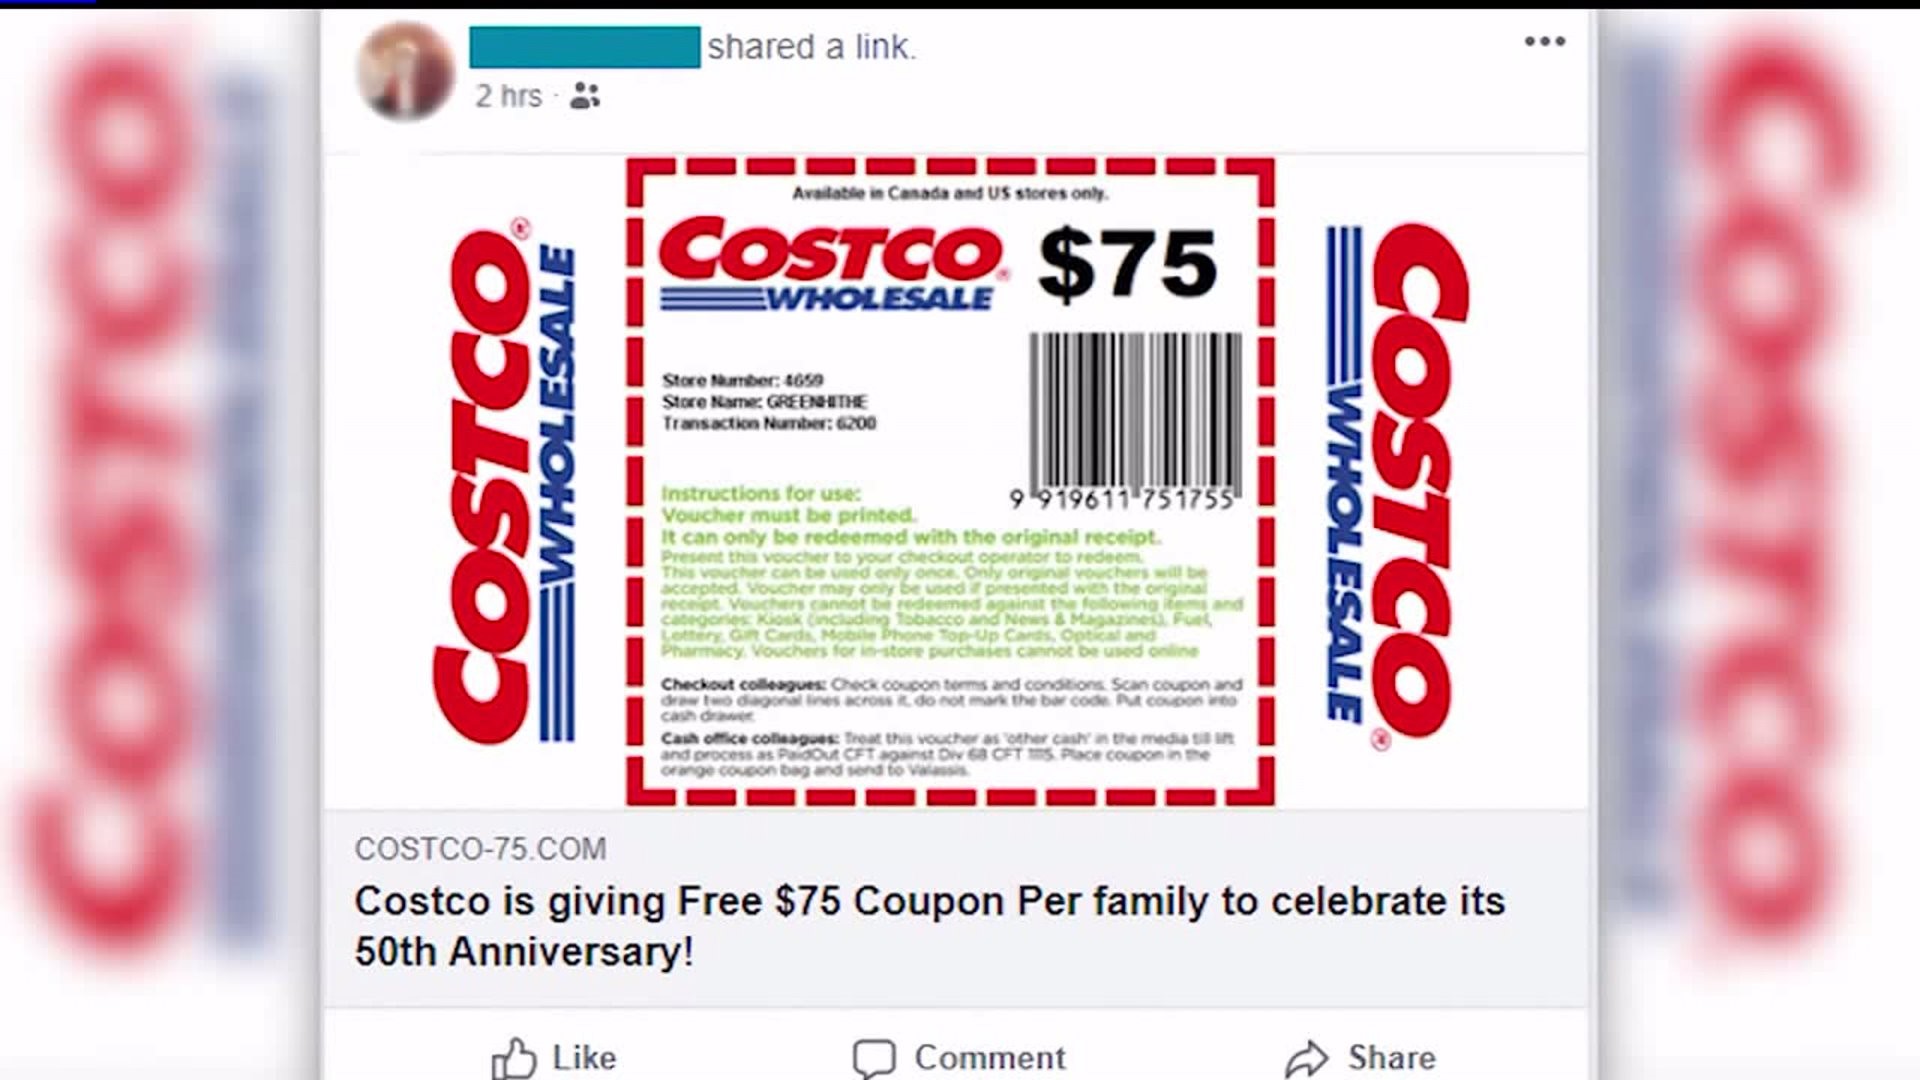 This viral 75 Costco coupon is fake, Costco says